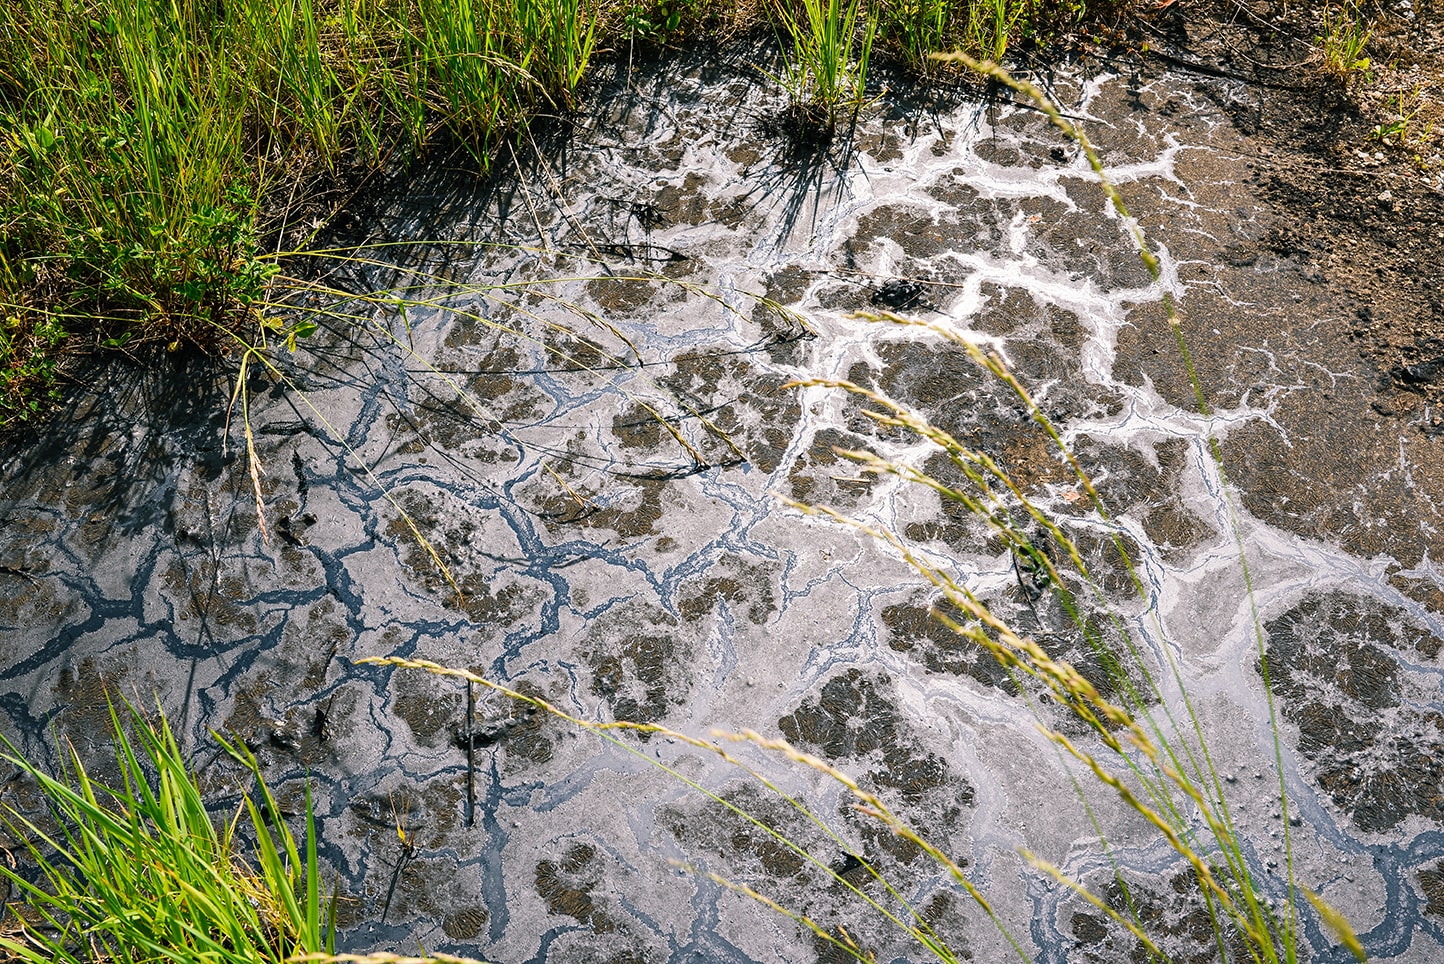 Proactive and Prepared: Rapid Response Industrial Group’s Approach to Environmental Spills